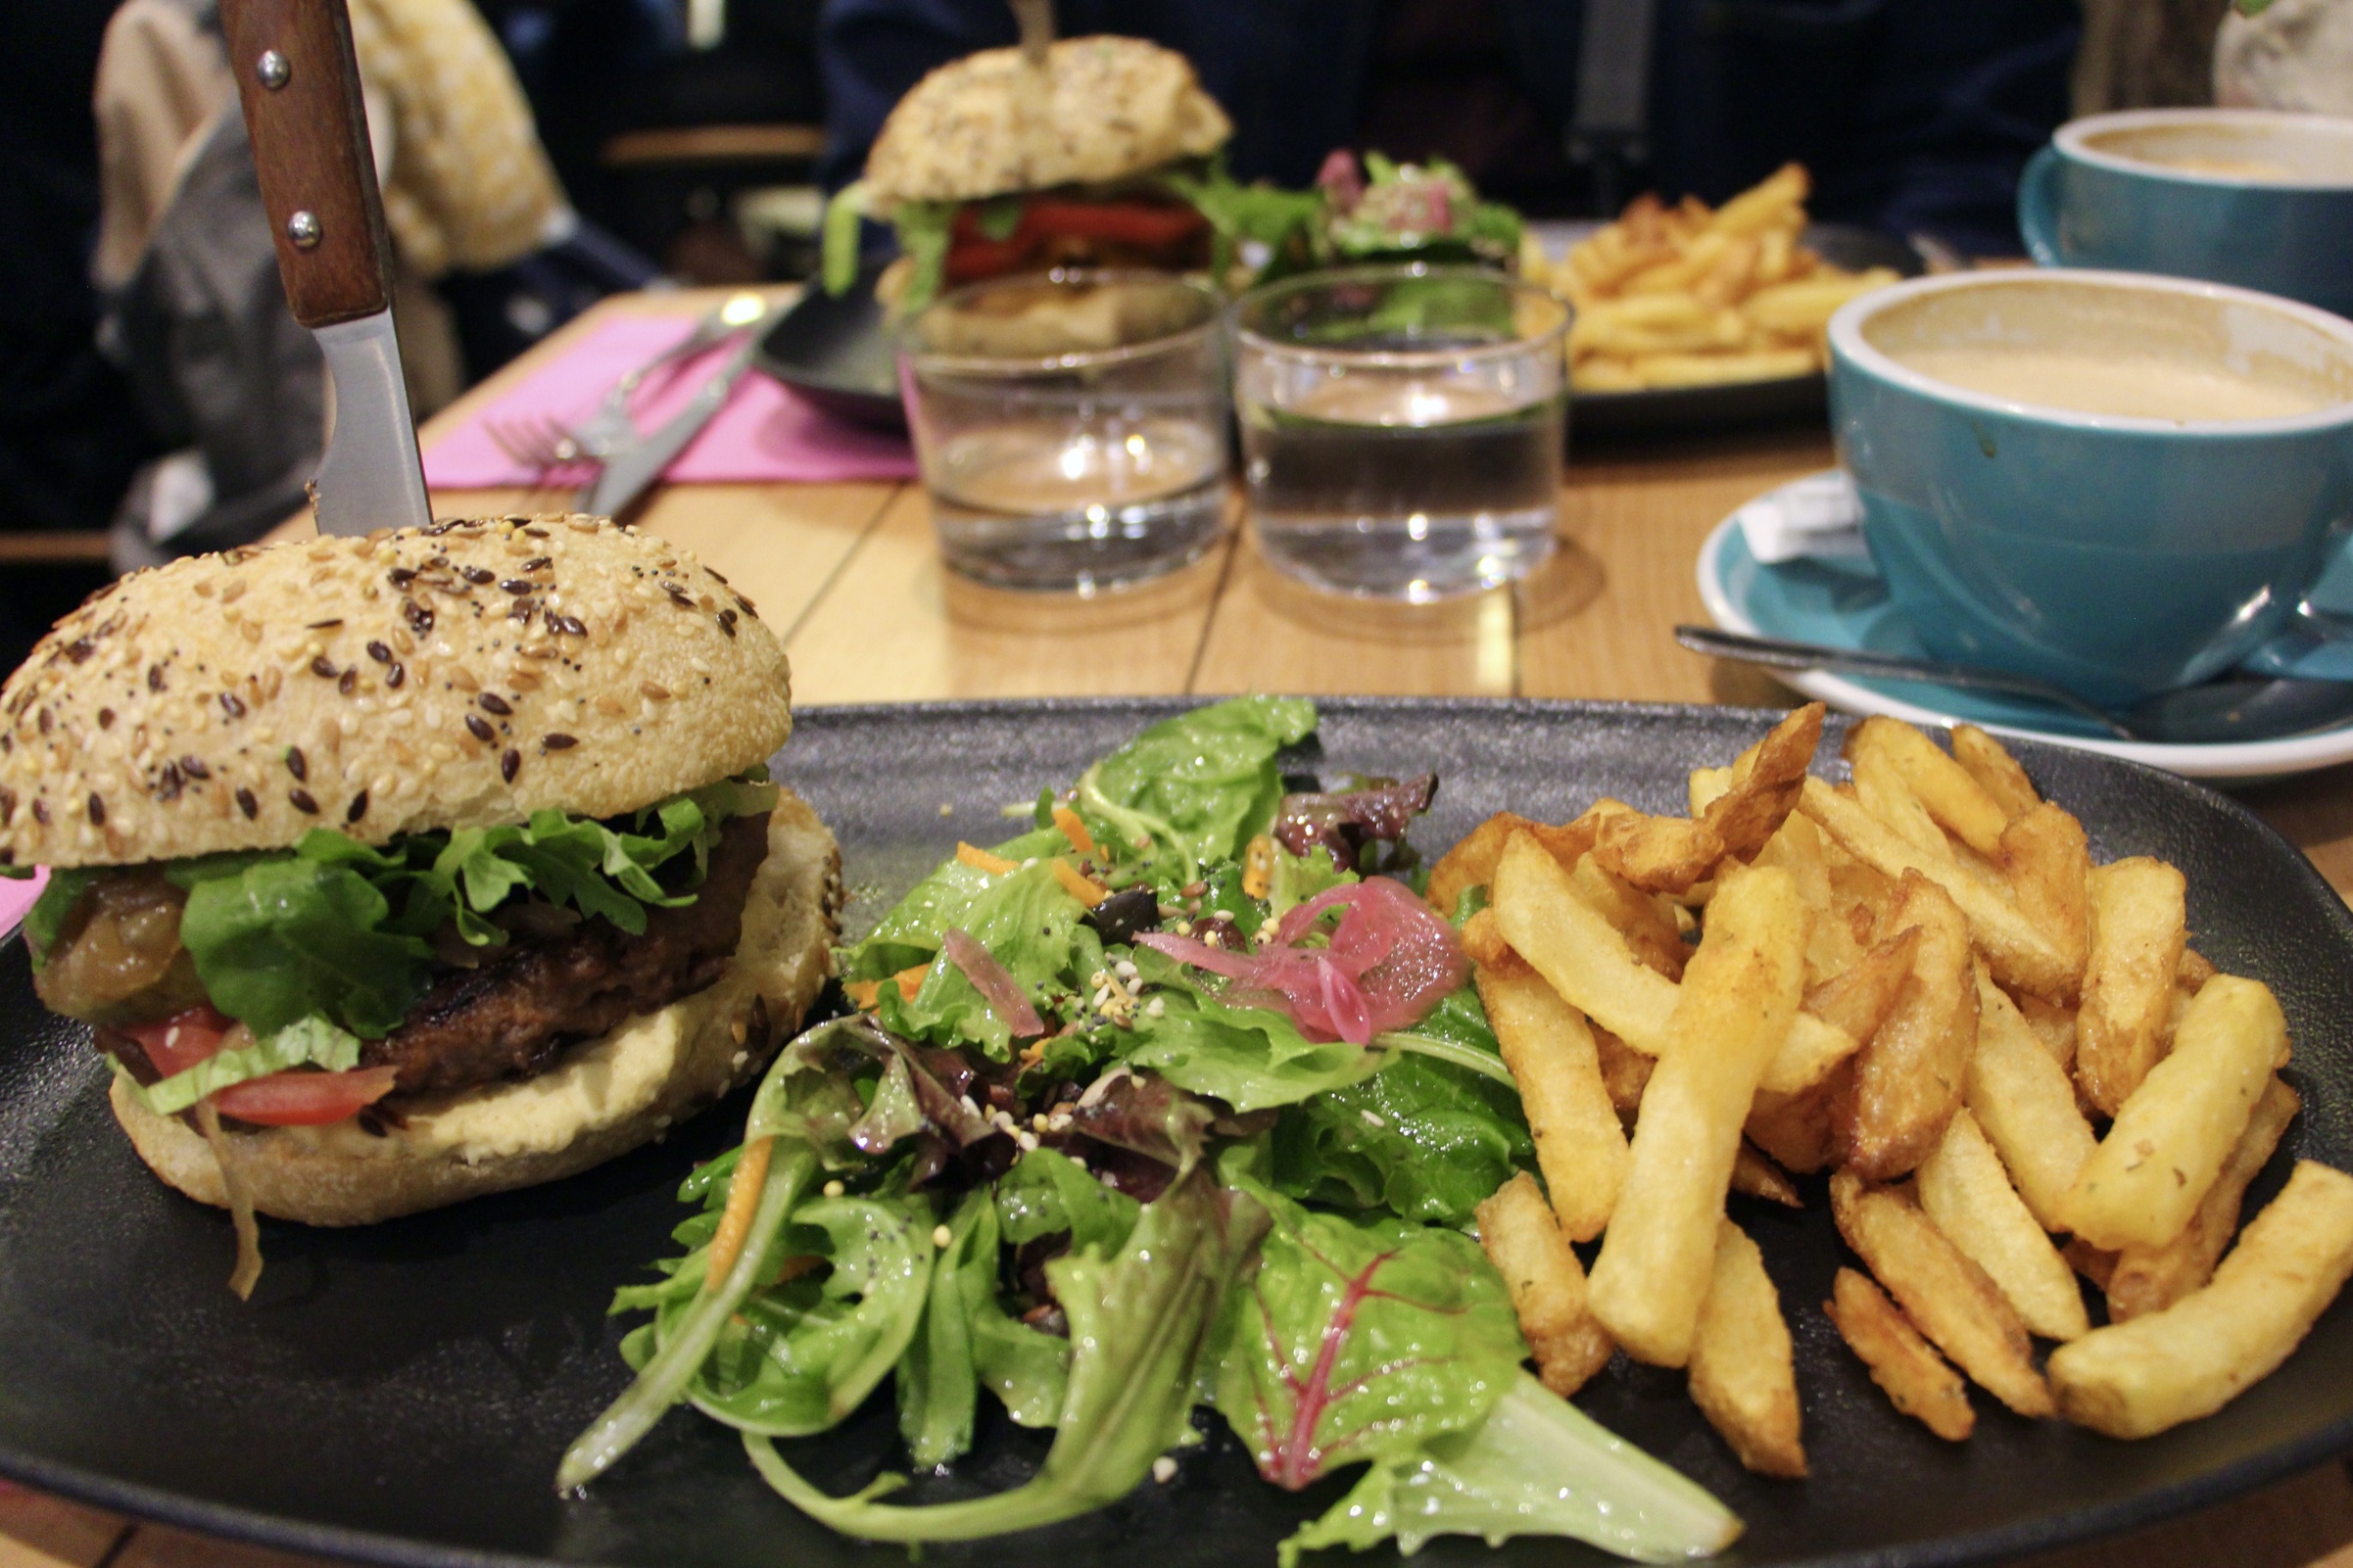 Milwaukee Café's Beyond Burger with a side salad and fries in Biarritz, France.